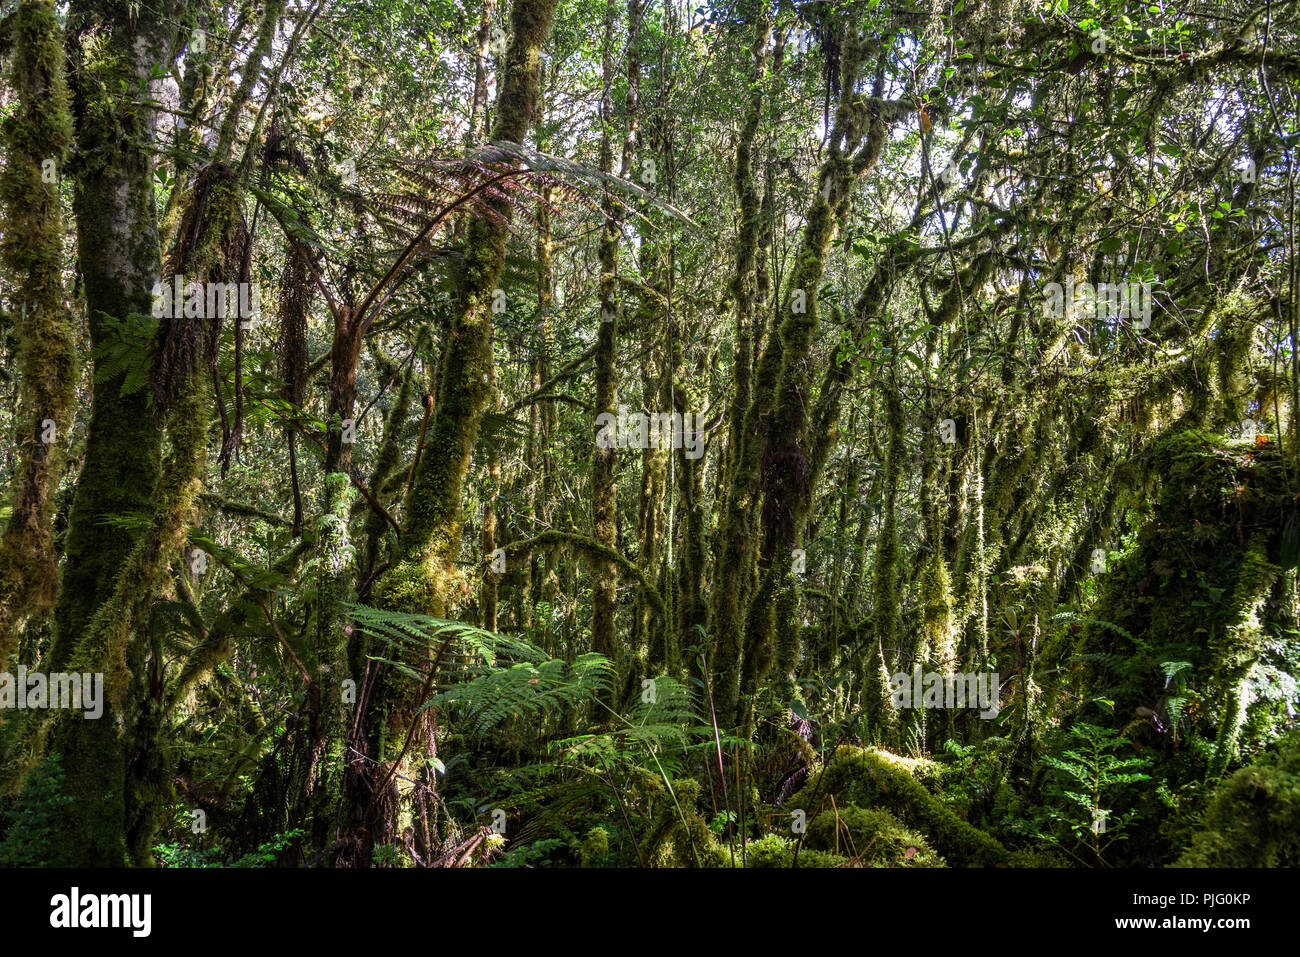 Green moss covered trees in the montane forest of Central Range in the island of New Guinea. Papua, Indonesia. Stock Photo